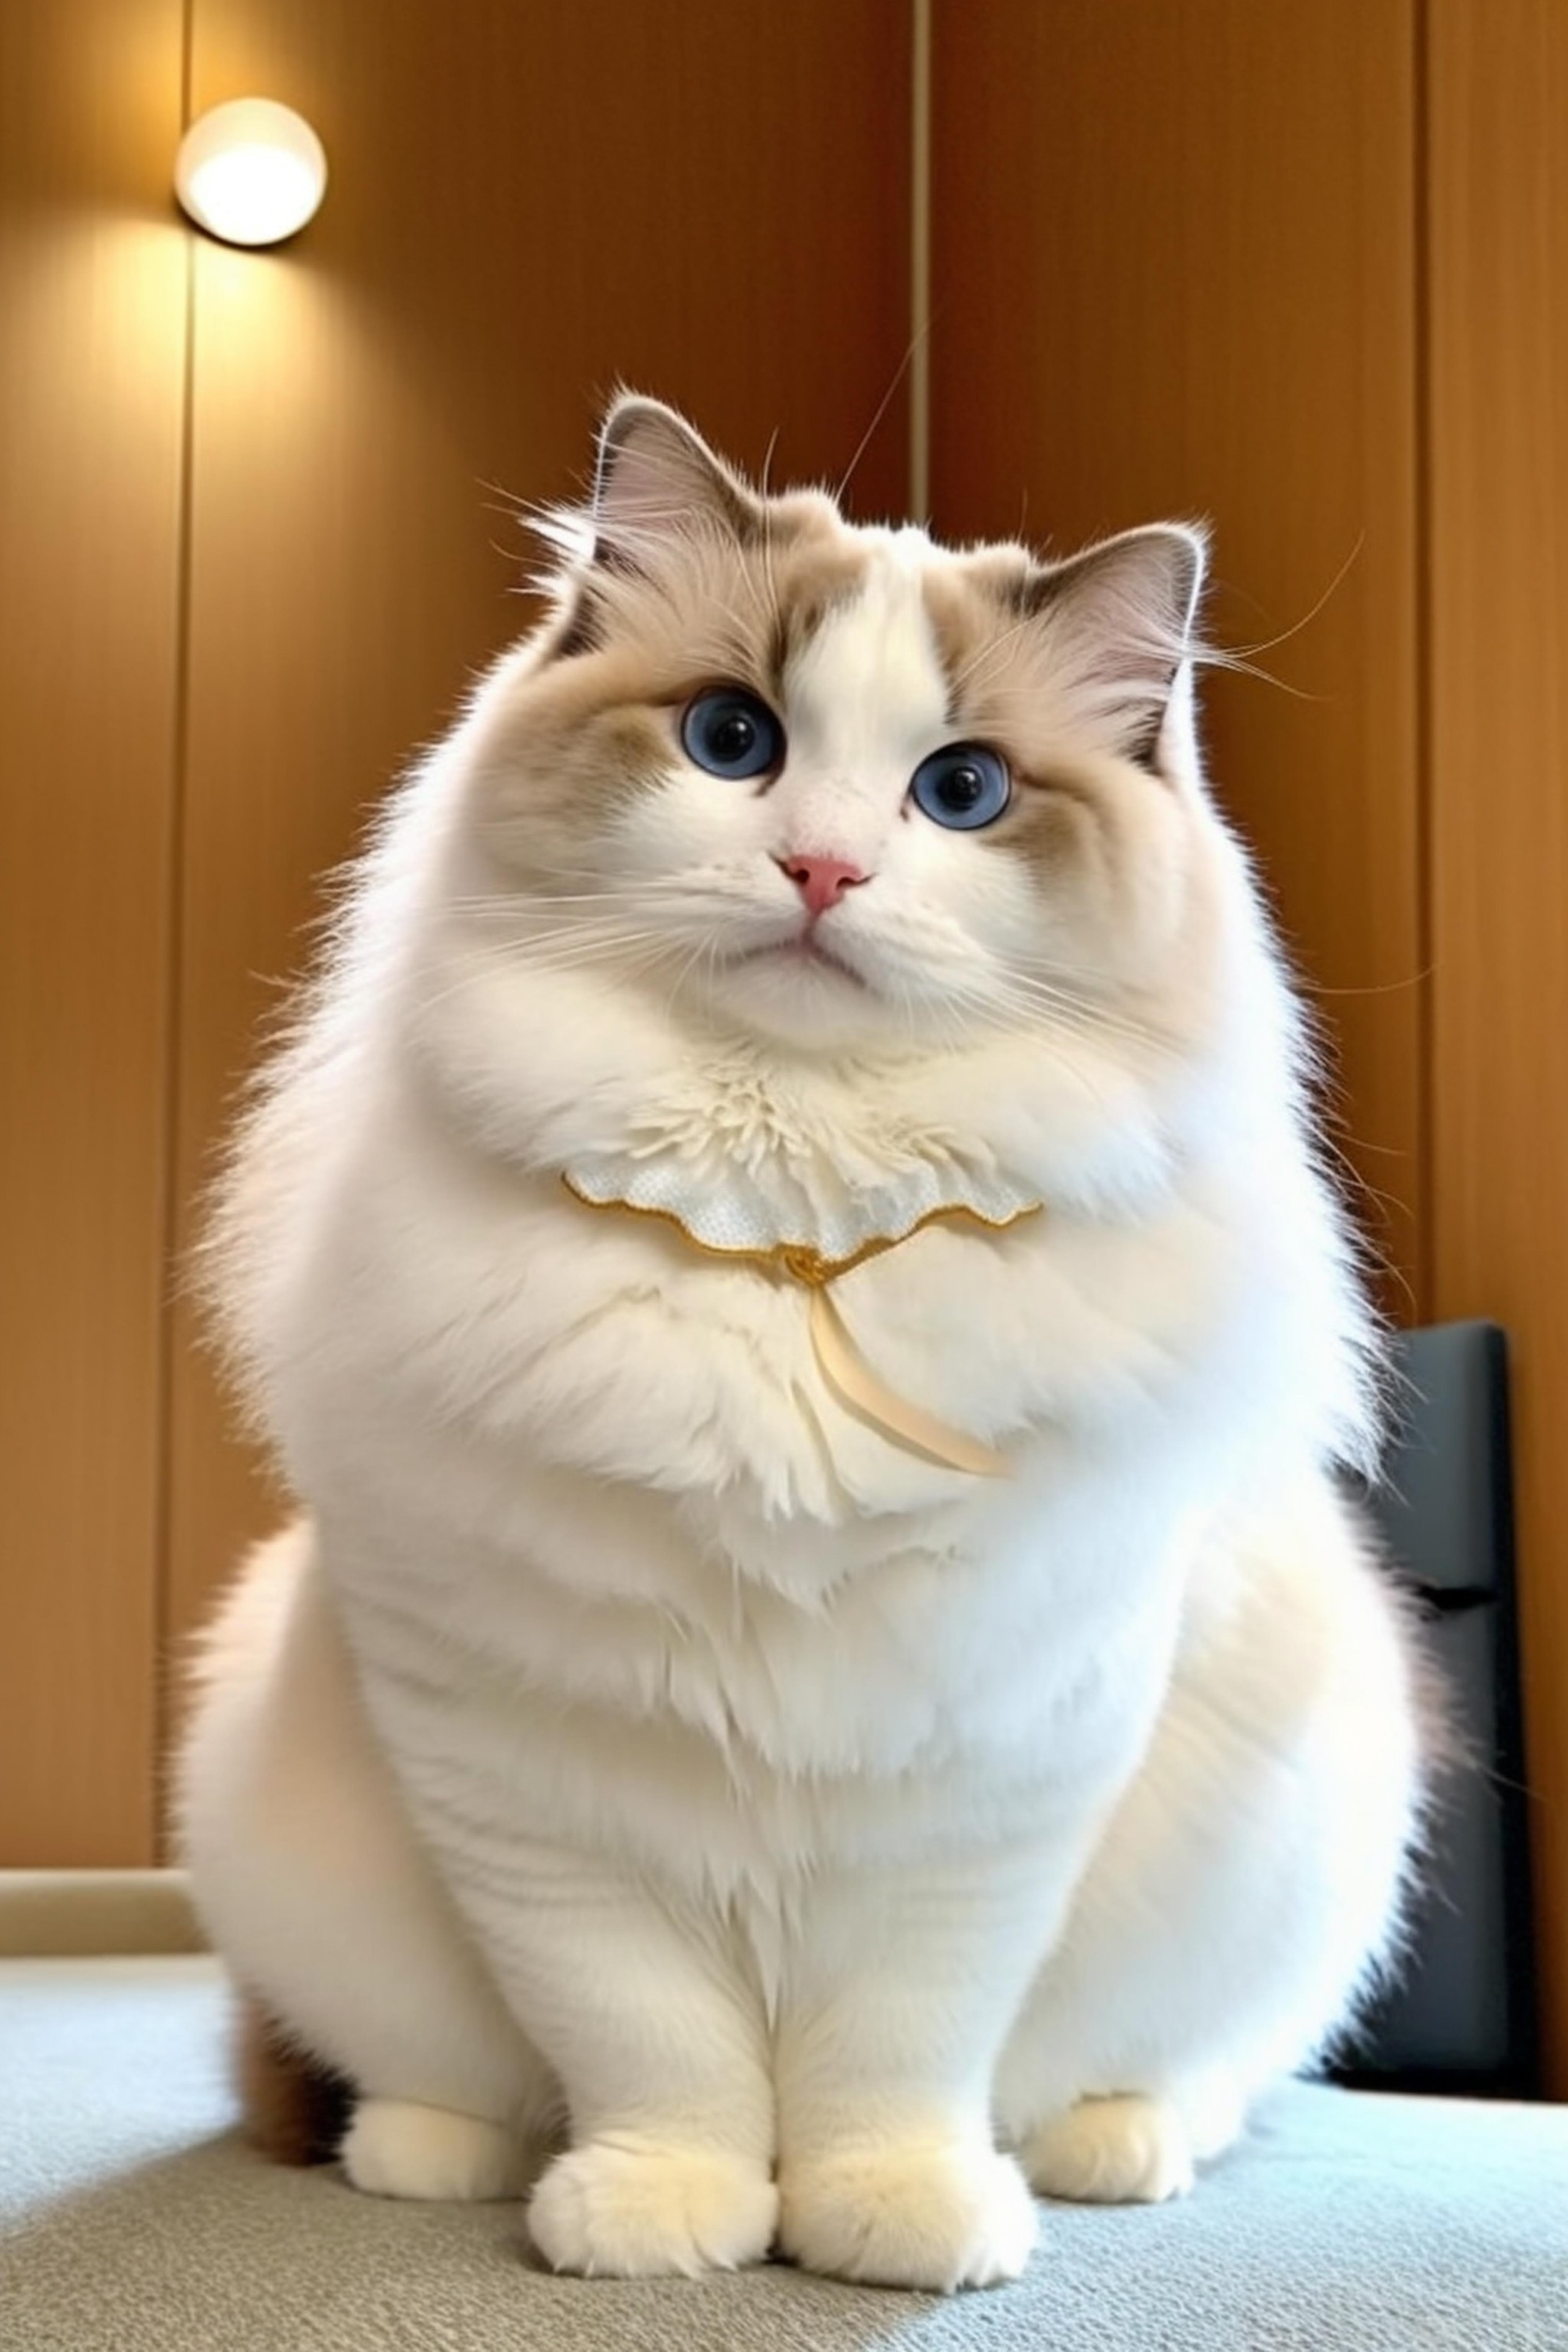 A fluffy white cat with blue eyes wearing a yellow collar.